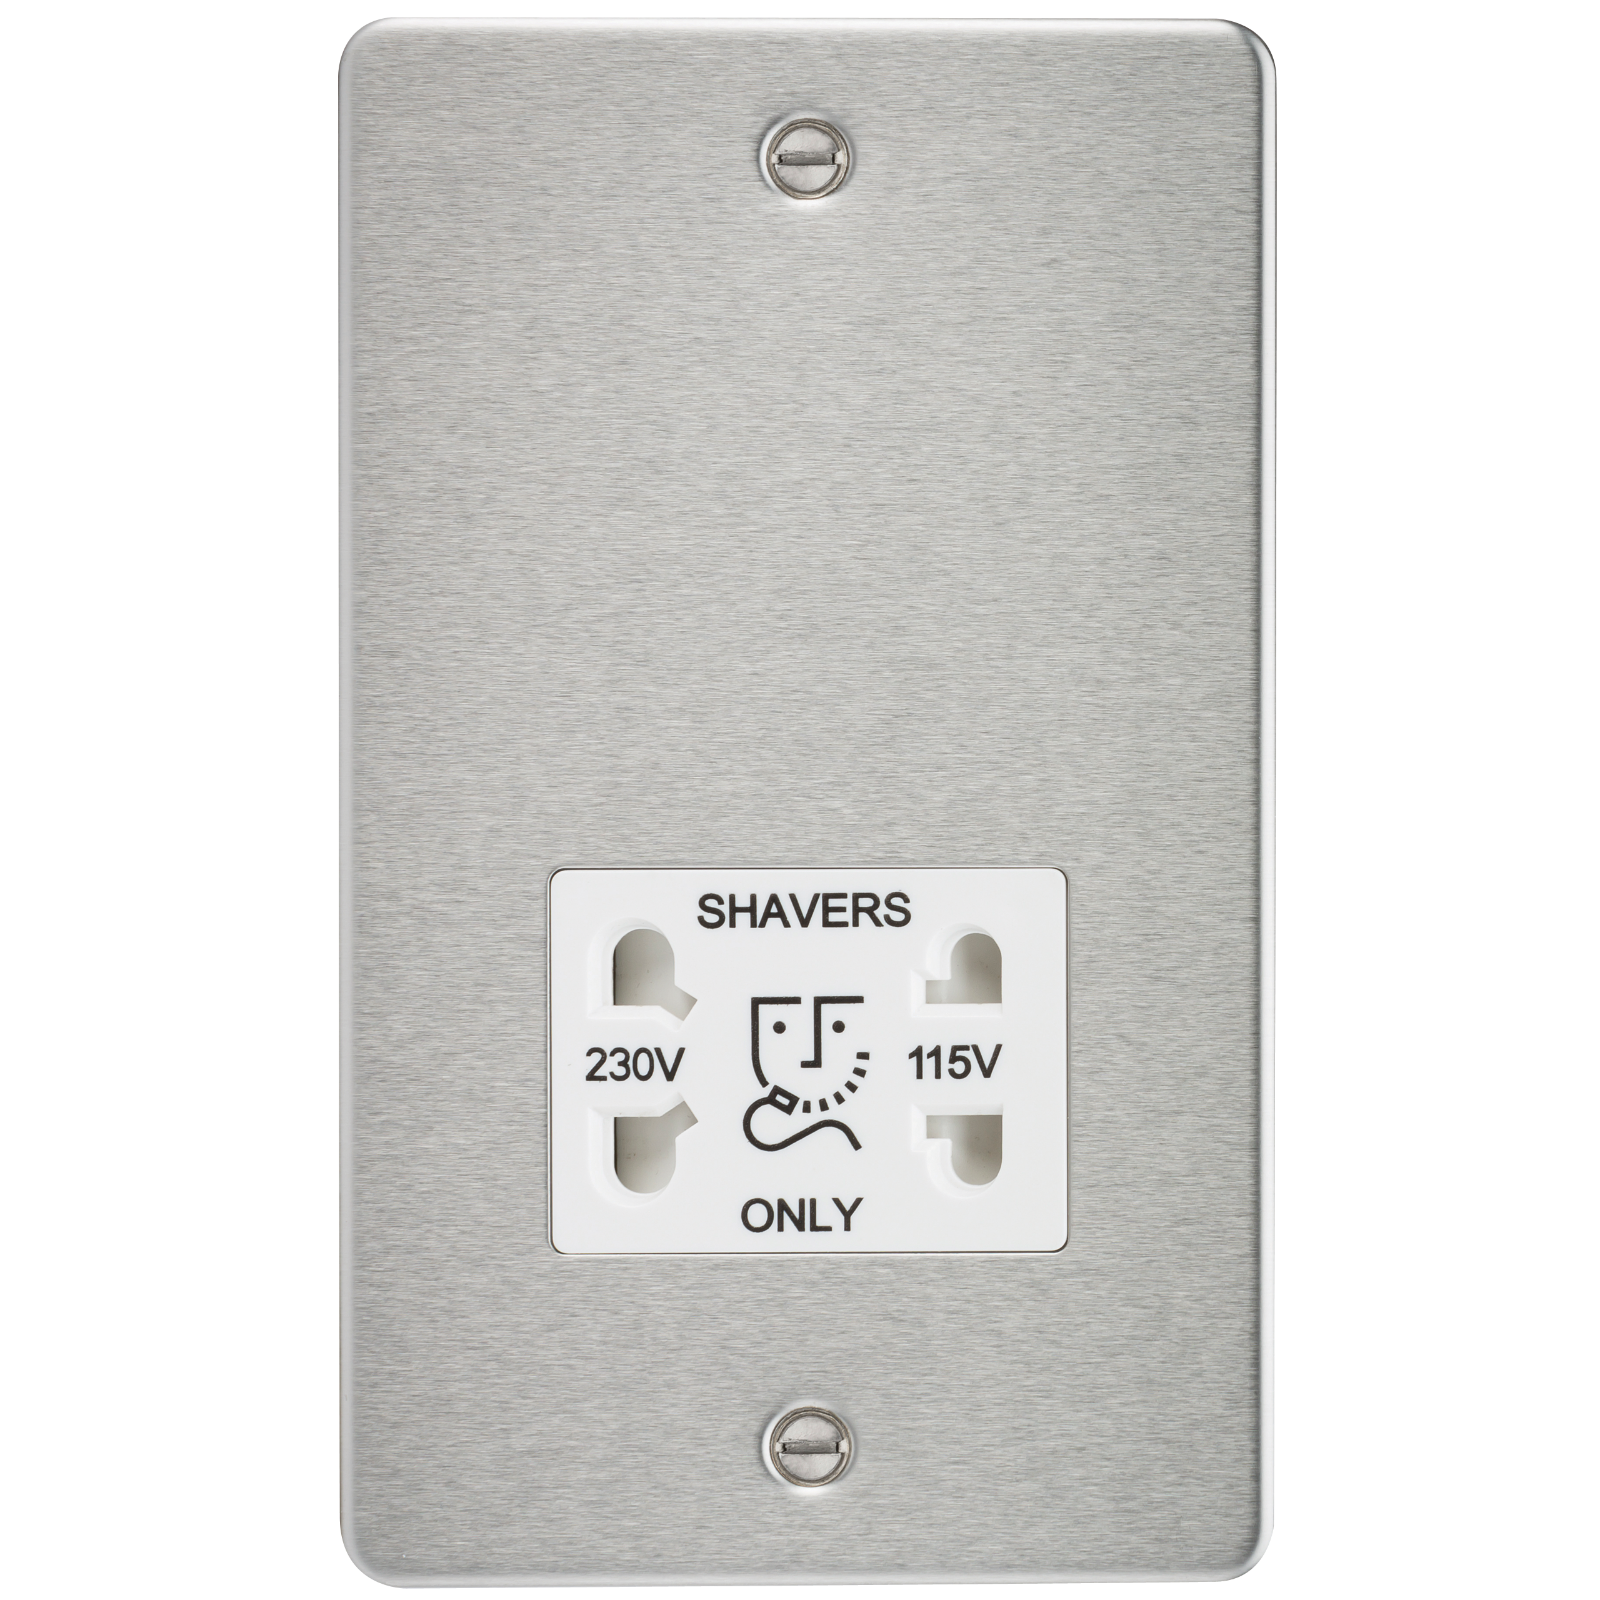 Flat Plate 115/230V Dual Voltage Shaver Socket - Brushed Chrome With White Insert - FP8900BCW 